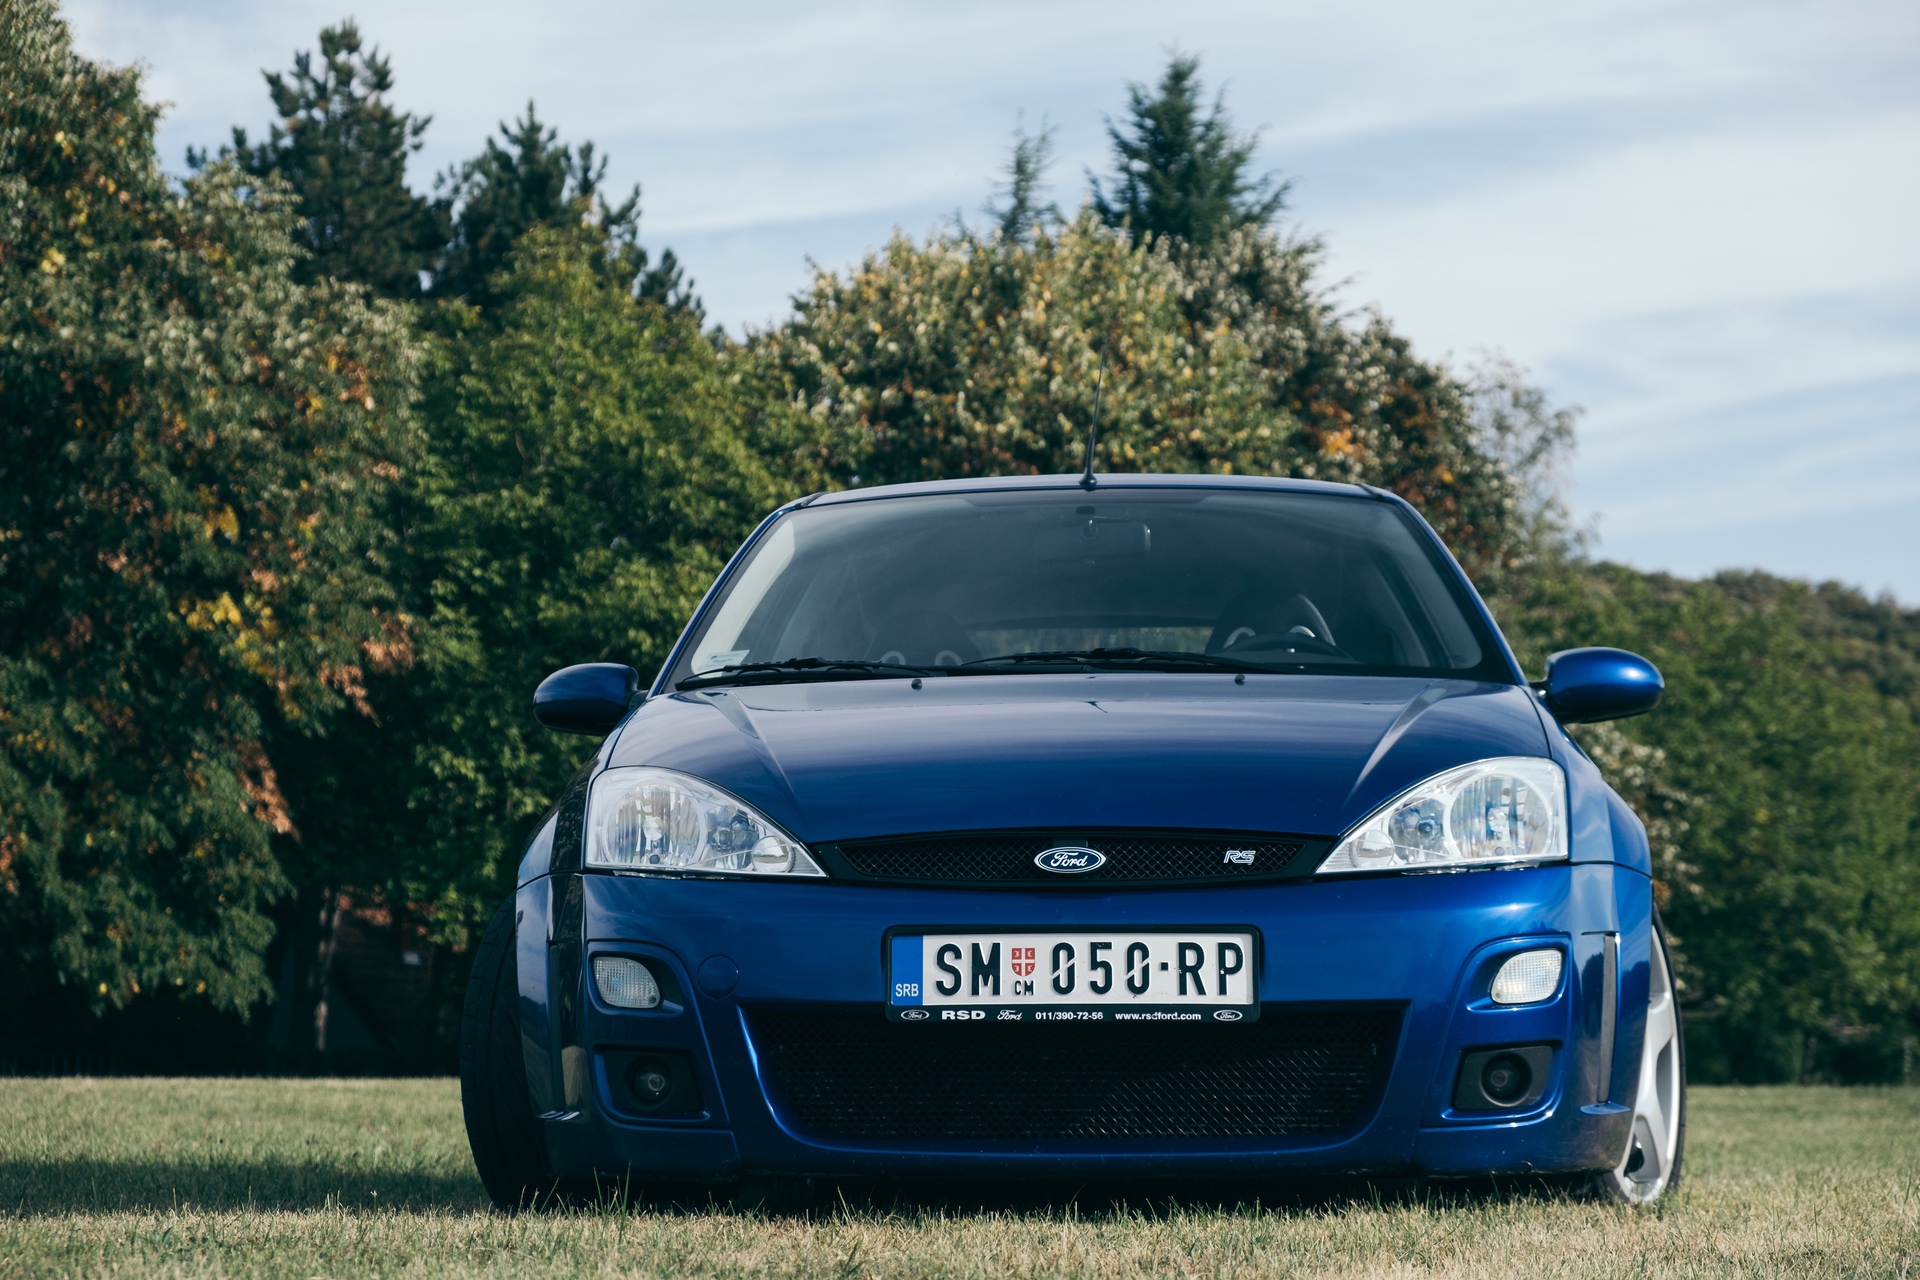 Front view of blue Ford Focus RS in field